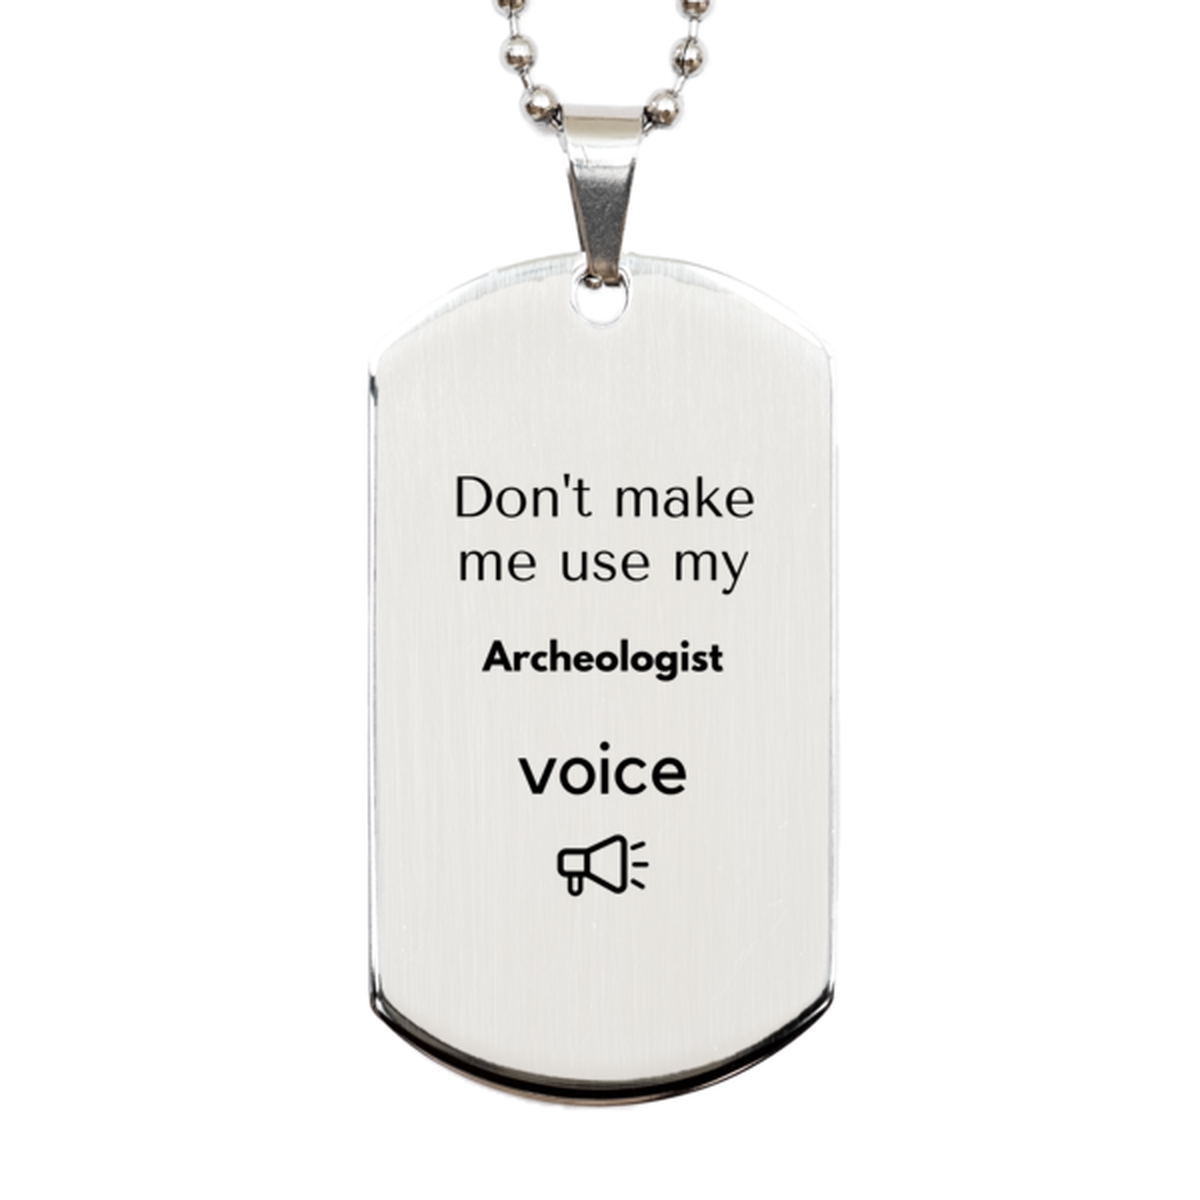 Don't make me use my Archeologist voice, Sarcasm Archeologist Gifts, Christmas Archeologist Silver Dog Tag Birthday Unique Gifts For Archeologist Coworkers, Men, Women, Colleague, Friends